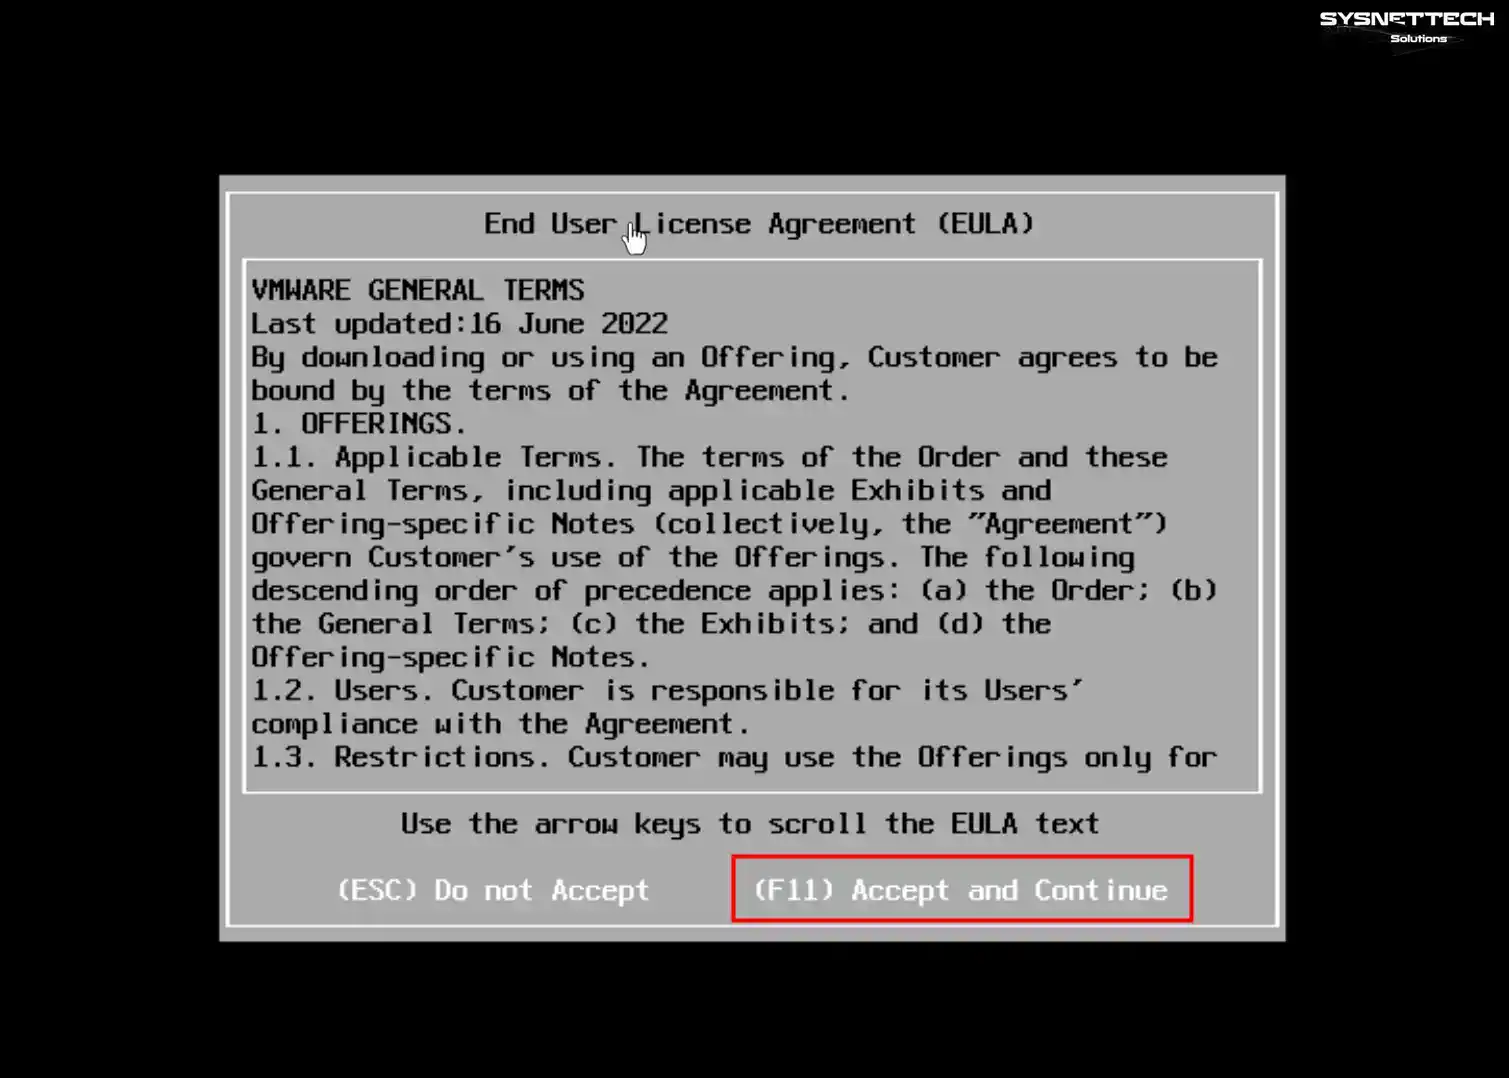 Accepting the User License Agreement